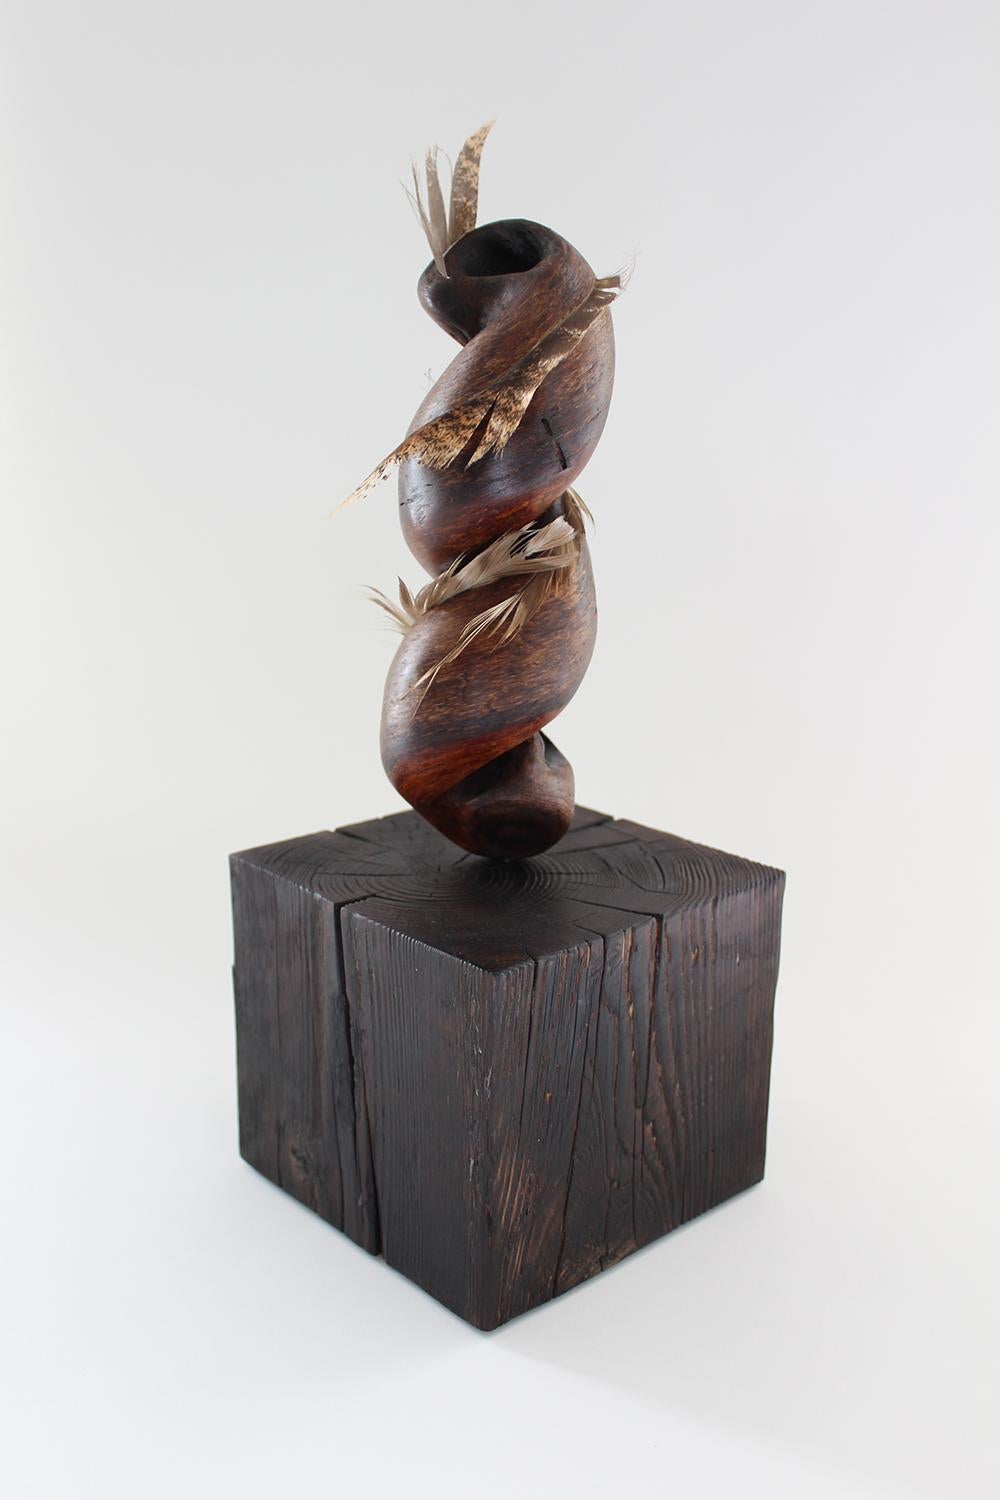 Miller Opie Abstract Sculpture - "Silent Whirlabout", wood, white oak, feather, browns, ivories, reds, sculpture